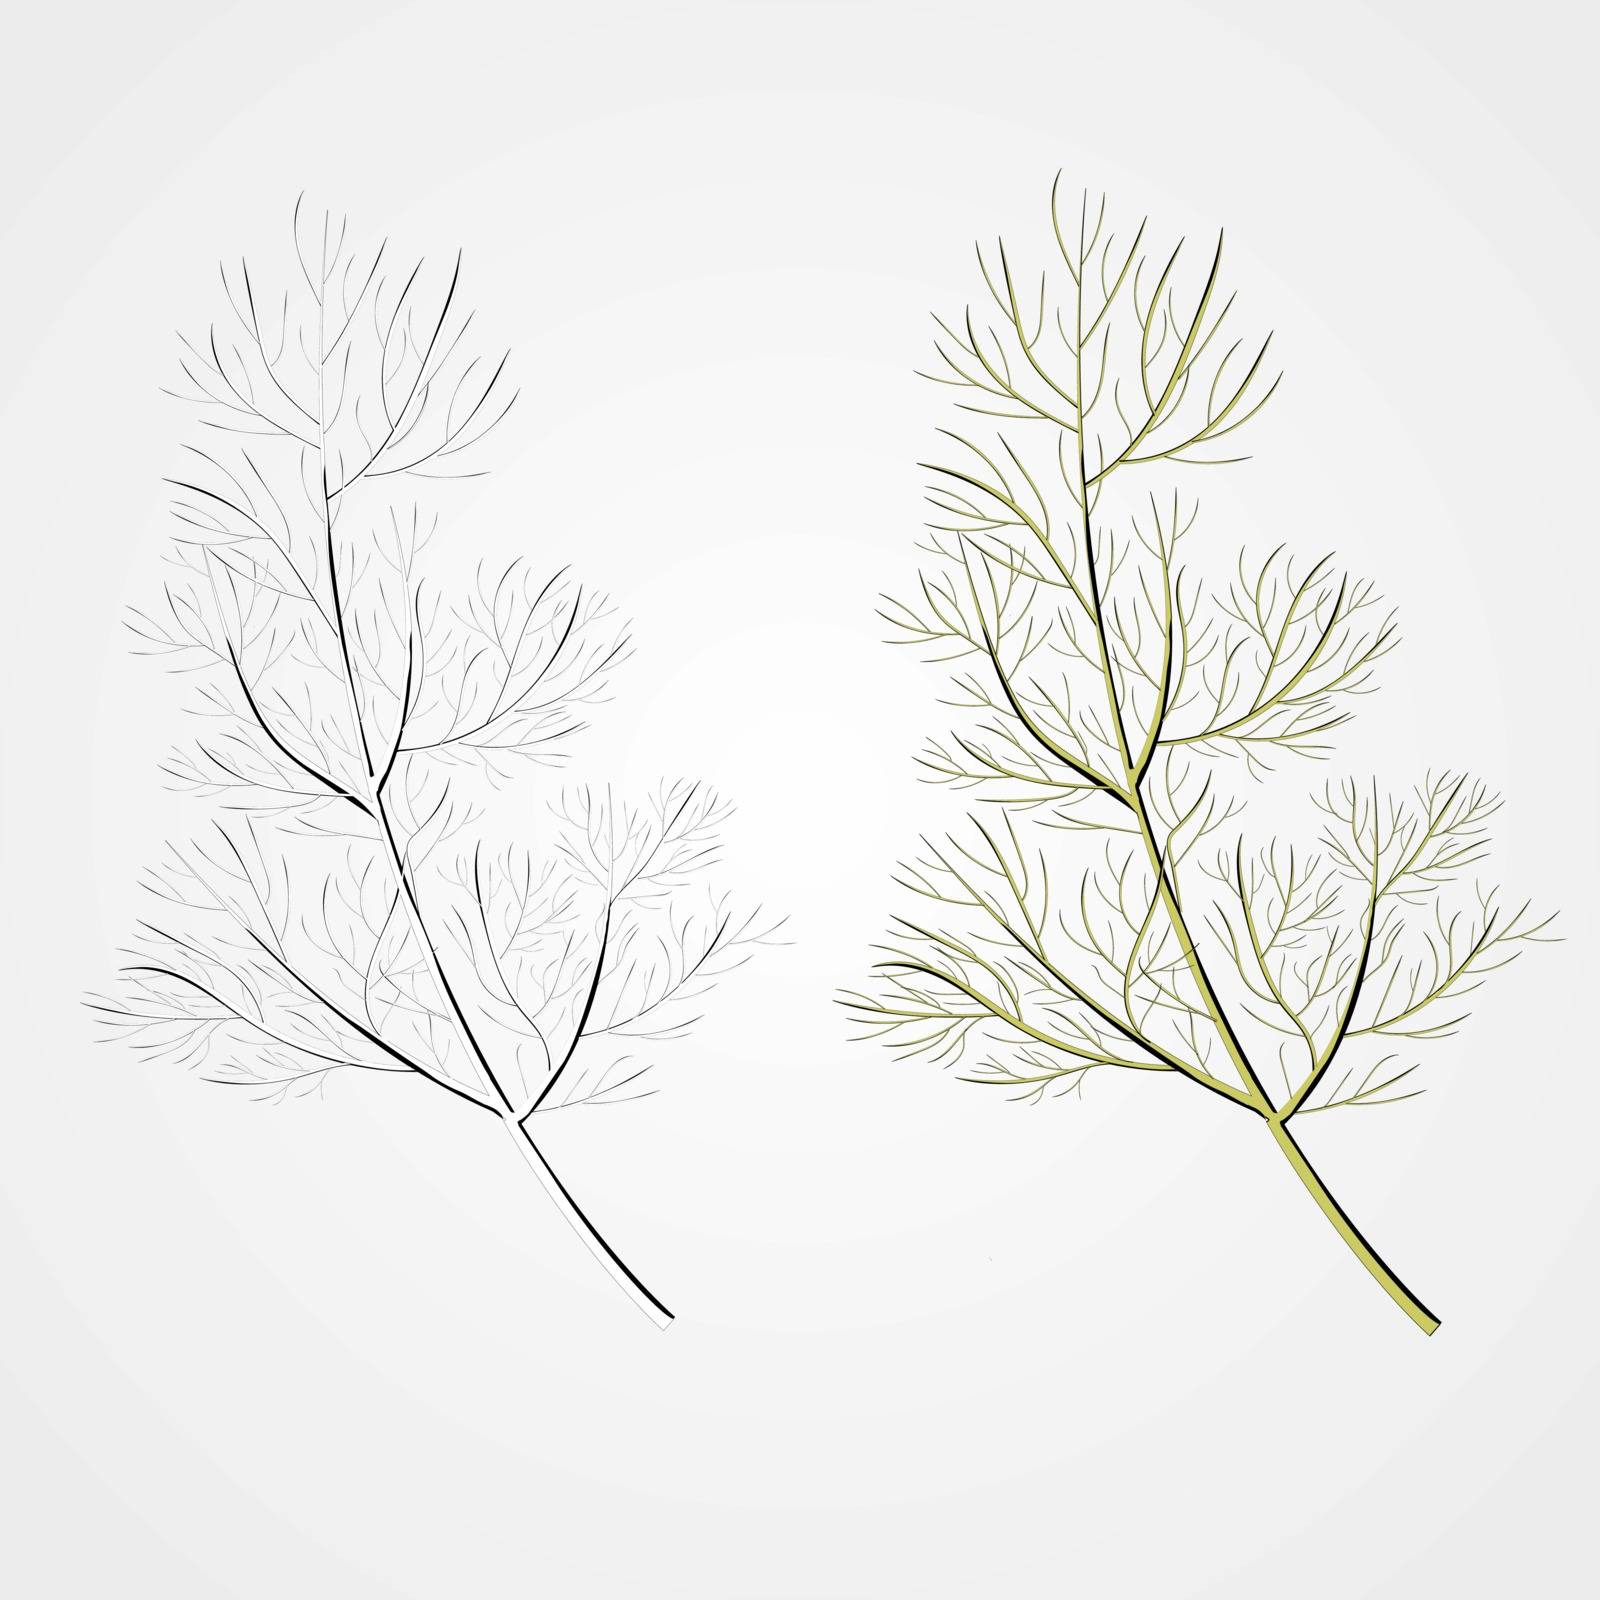 A sprig of dill. Isolated vector illustration. Herbal nature plant. Botanical illustration.